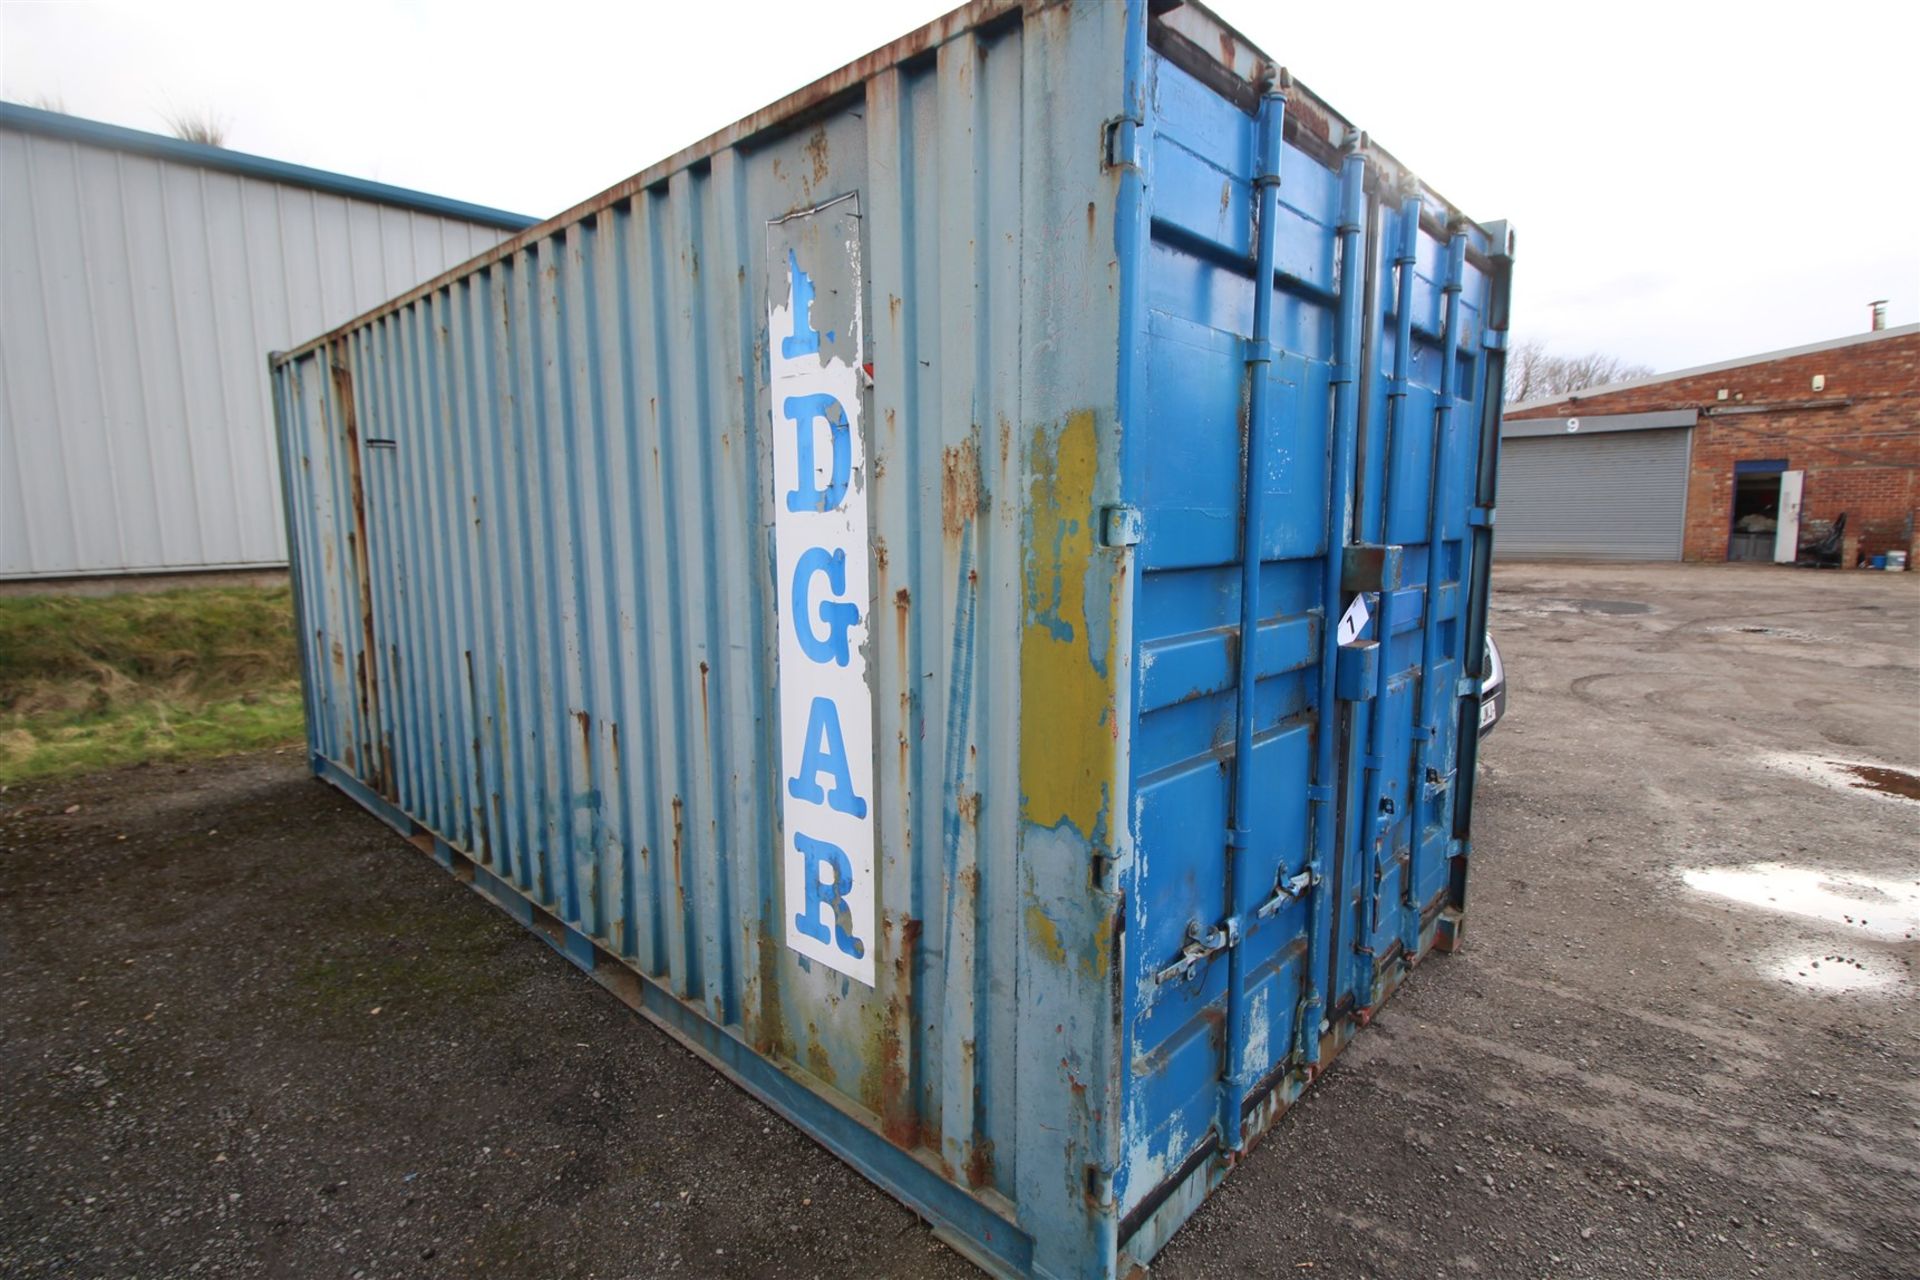 BLUE PAINTED 20FT x 8FT STANDARD STEEL SHIPPING CONTAINER.